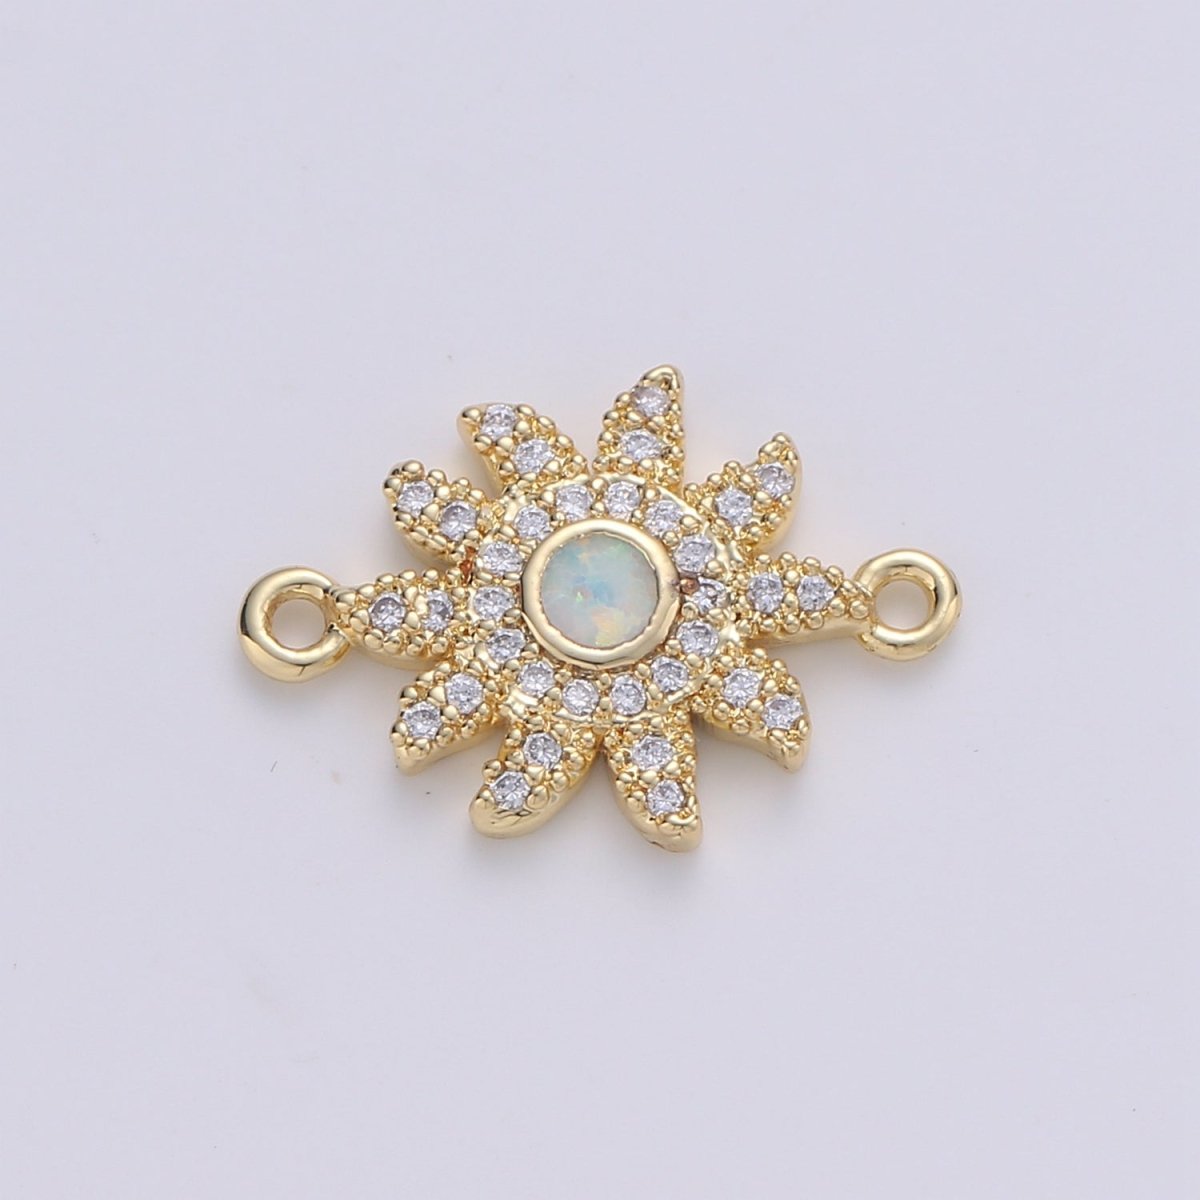 Dainty Opal Bracelet Connector Gold Sun Charm 18k Gold Fill Sunburst Charm Connector for Bracelet Necklace Earring Charm Component F-497 F-498 F-499 - DLUXCA